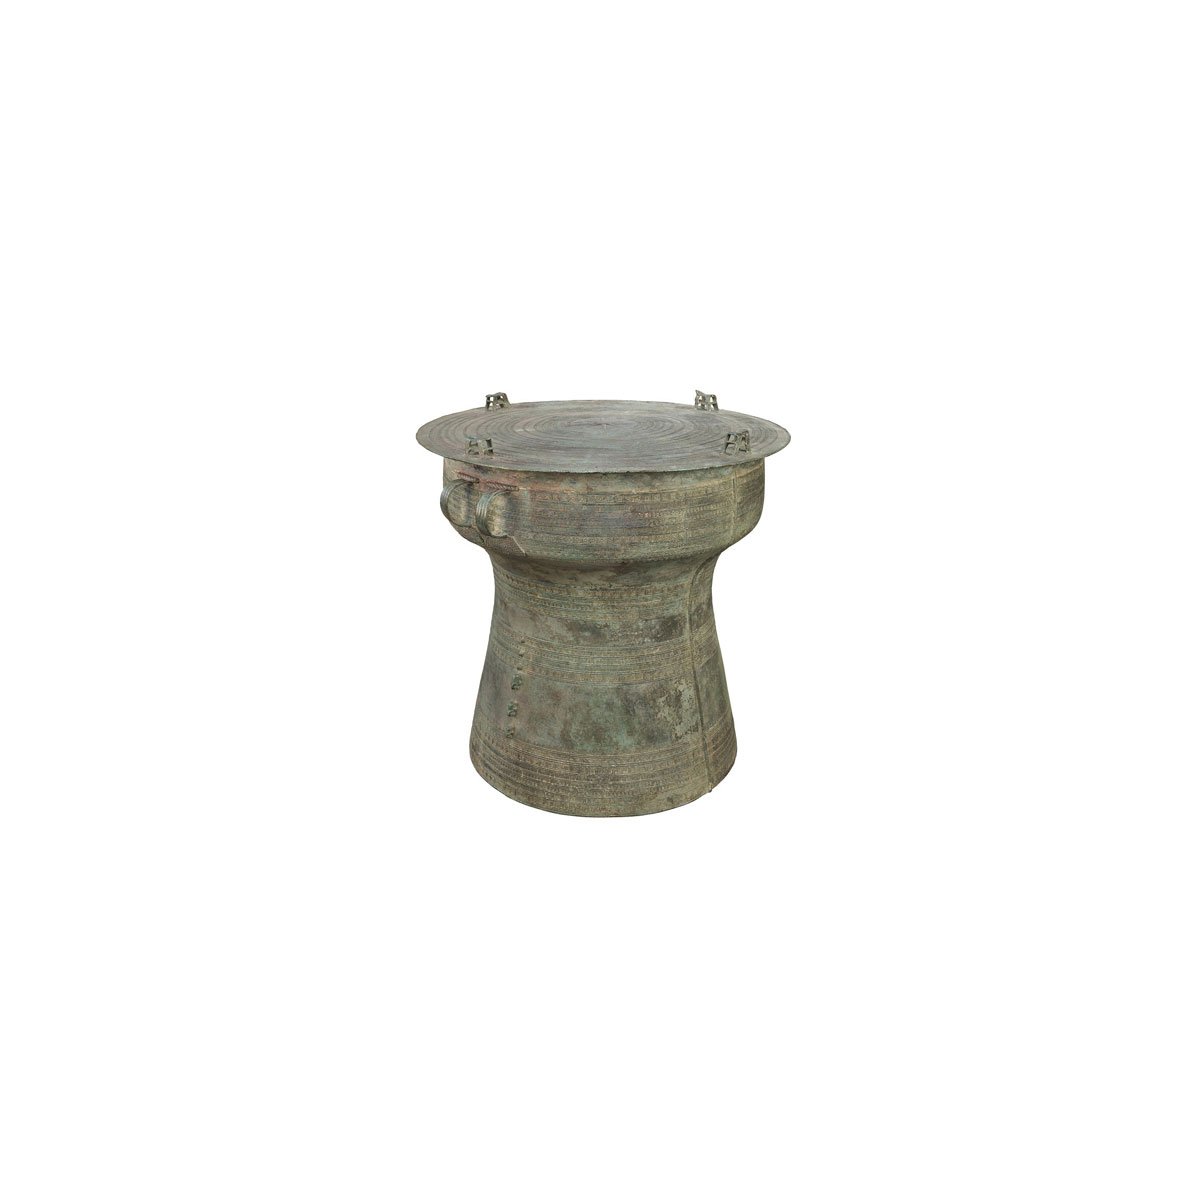 short rain drum antique replica solid bronze frog accent tables raindrums indoor decor inspiring seats and coffee table runner placemats teak patio furniture mission style dining